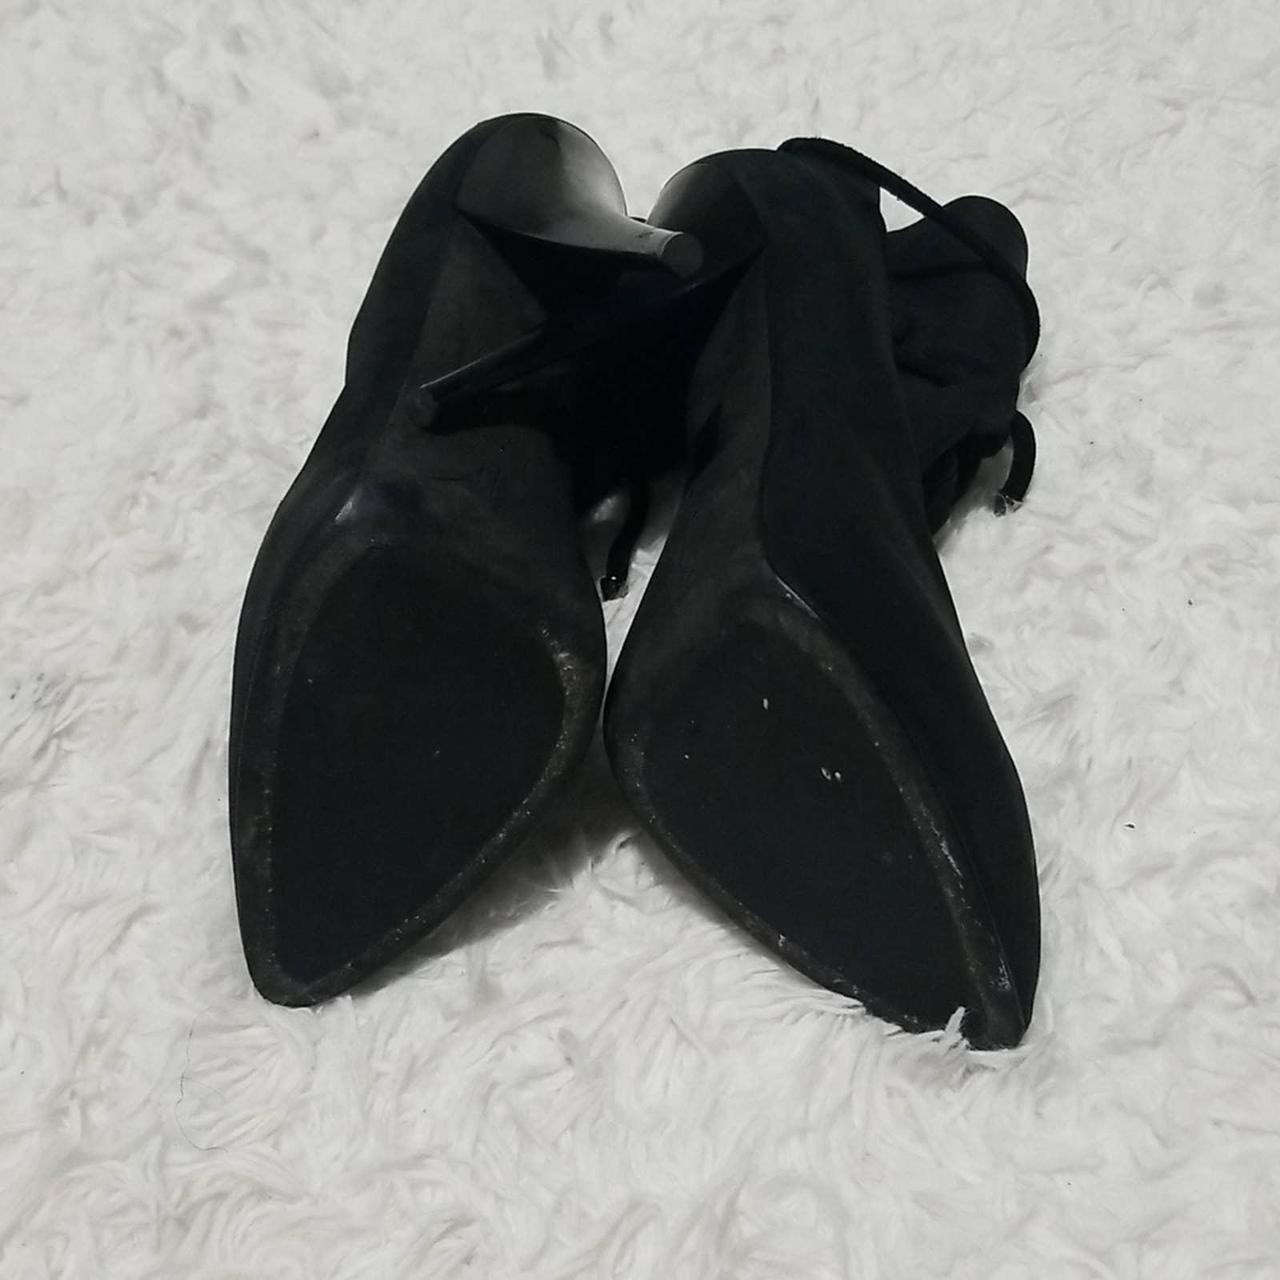 Product Image 2 - Preowned Giuseppe Suede Black Platform